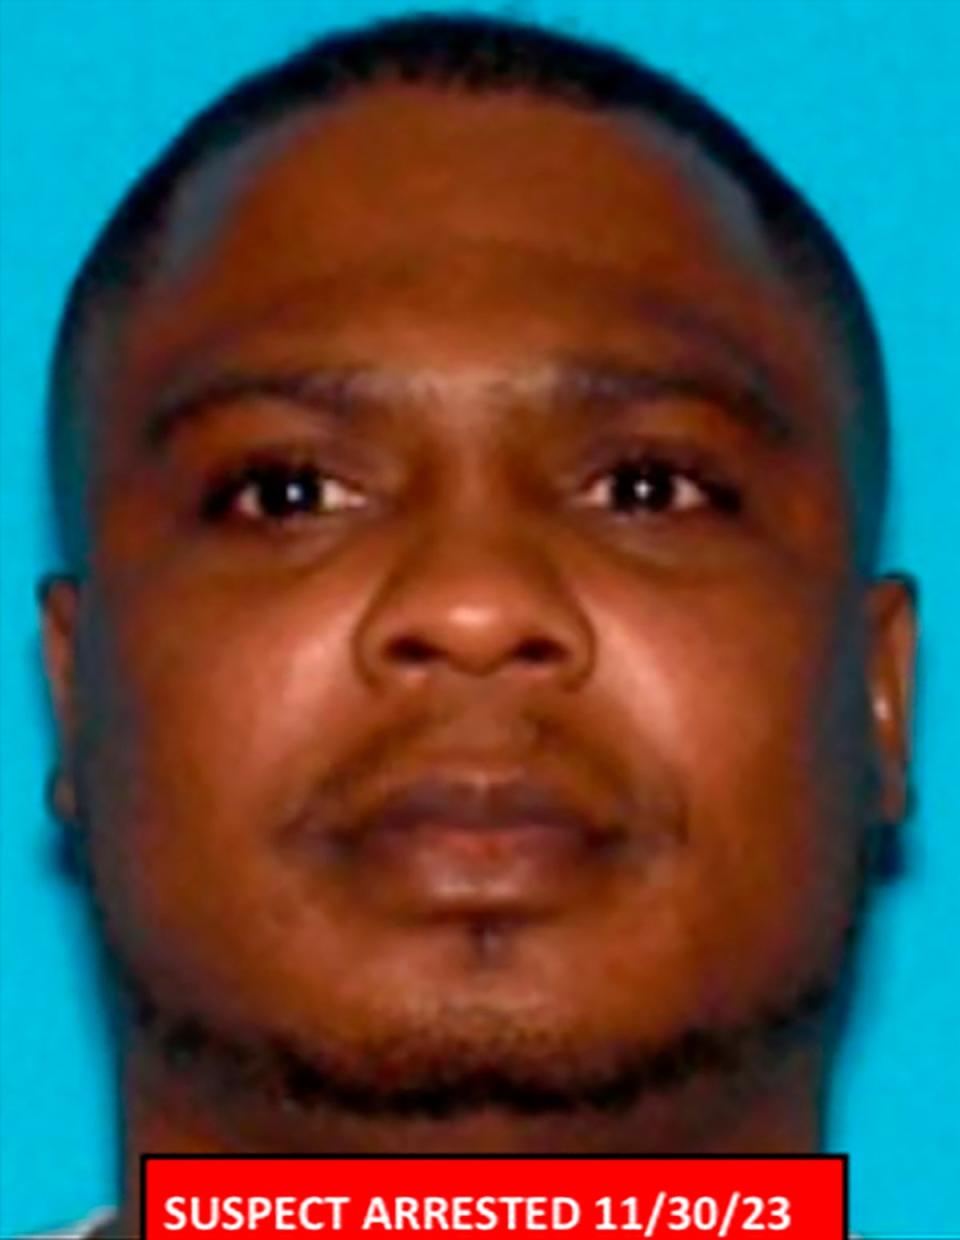 This photo released by the Los Angeles County Sheriff’s Department shows suspect Jerrid Joseph Powell (AP)